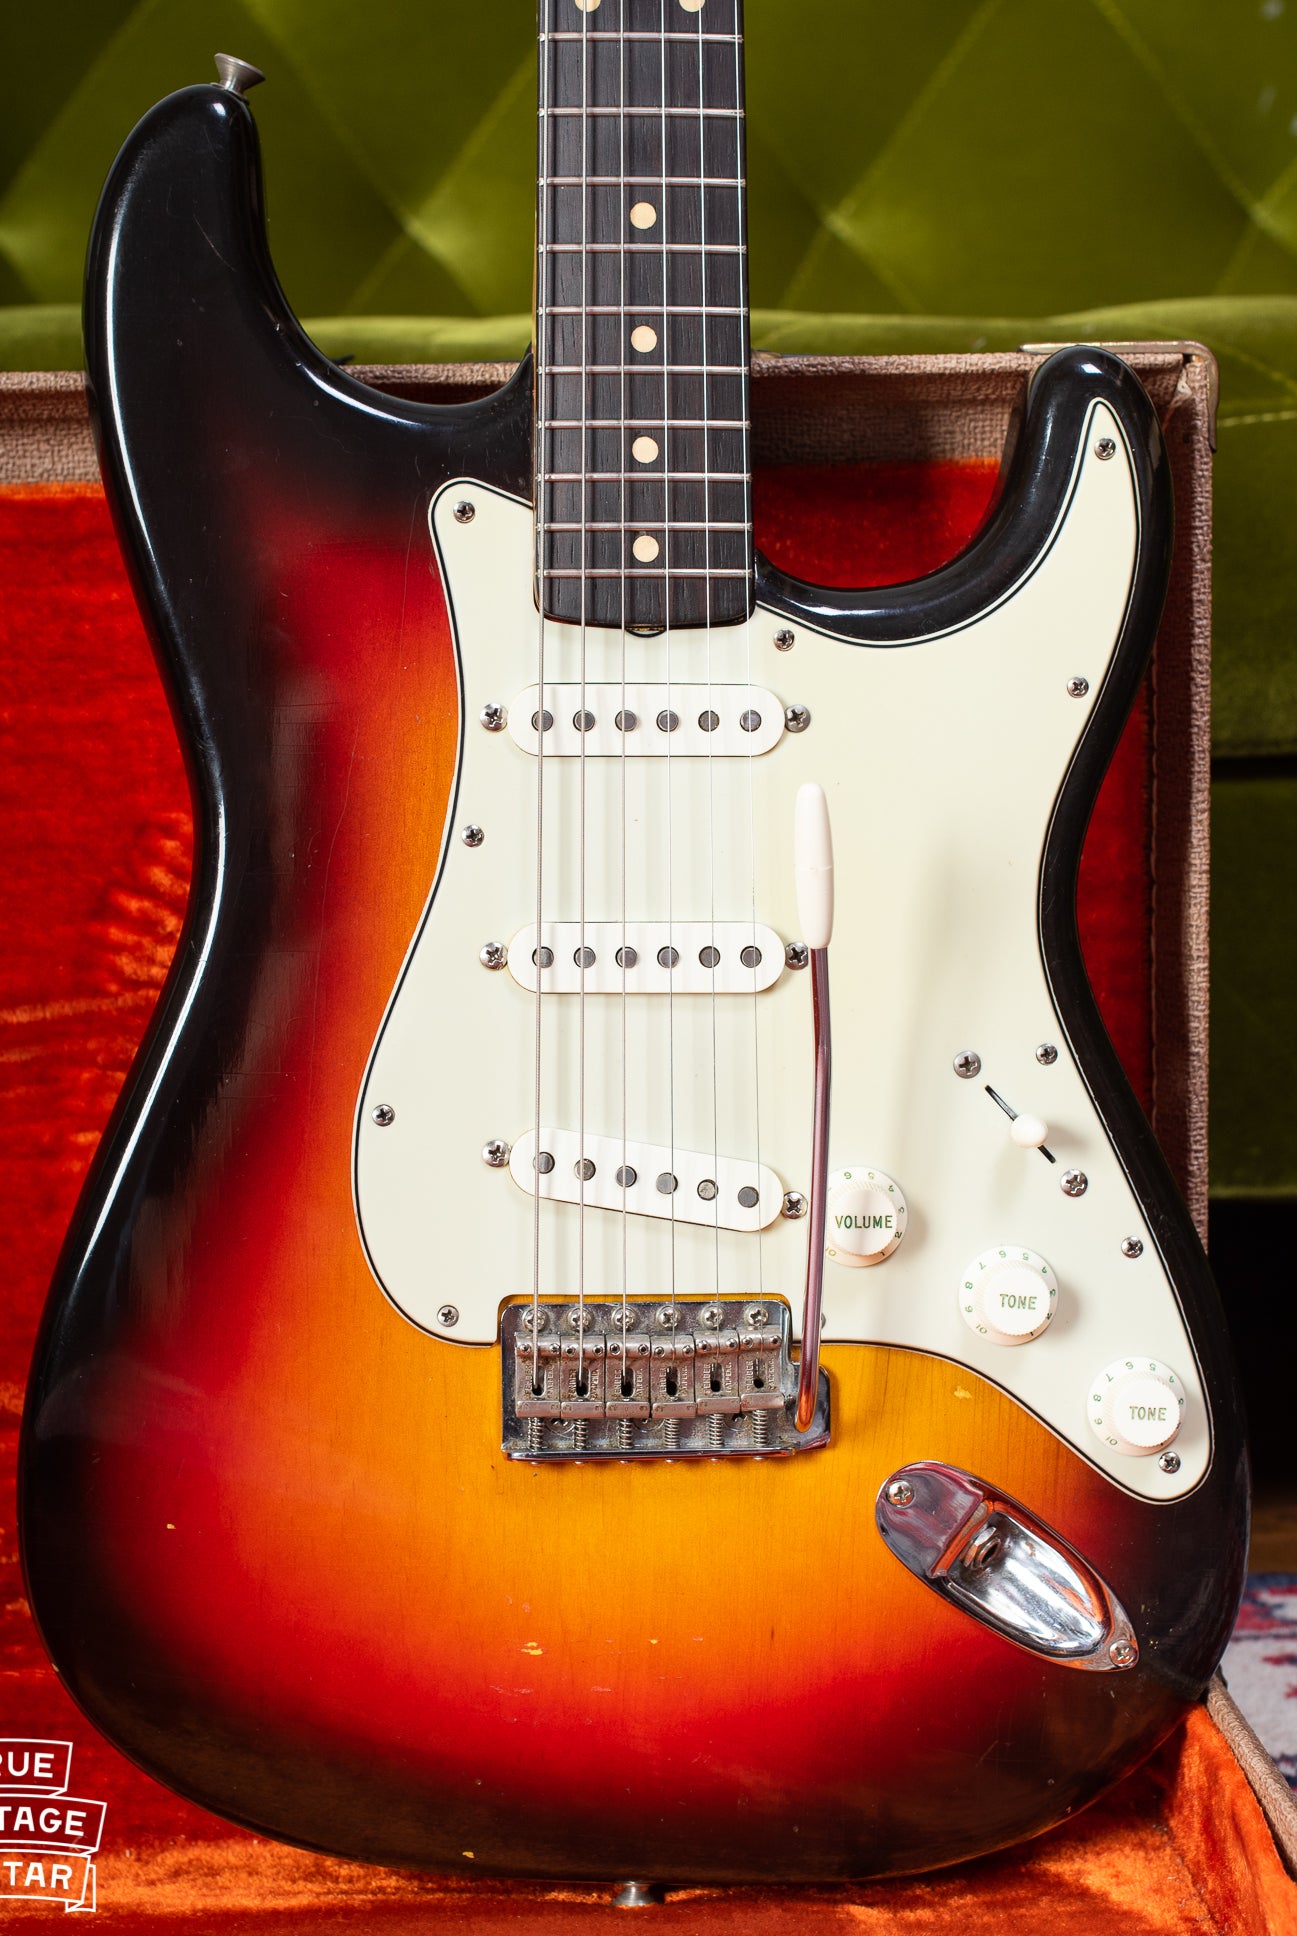 Fender Stratocaster 1962 guitar, what is my Fender worth, how to date Fender Stratocaster 1960s